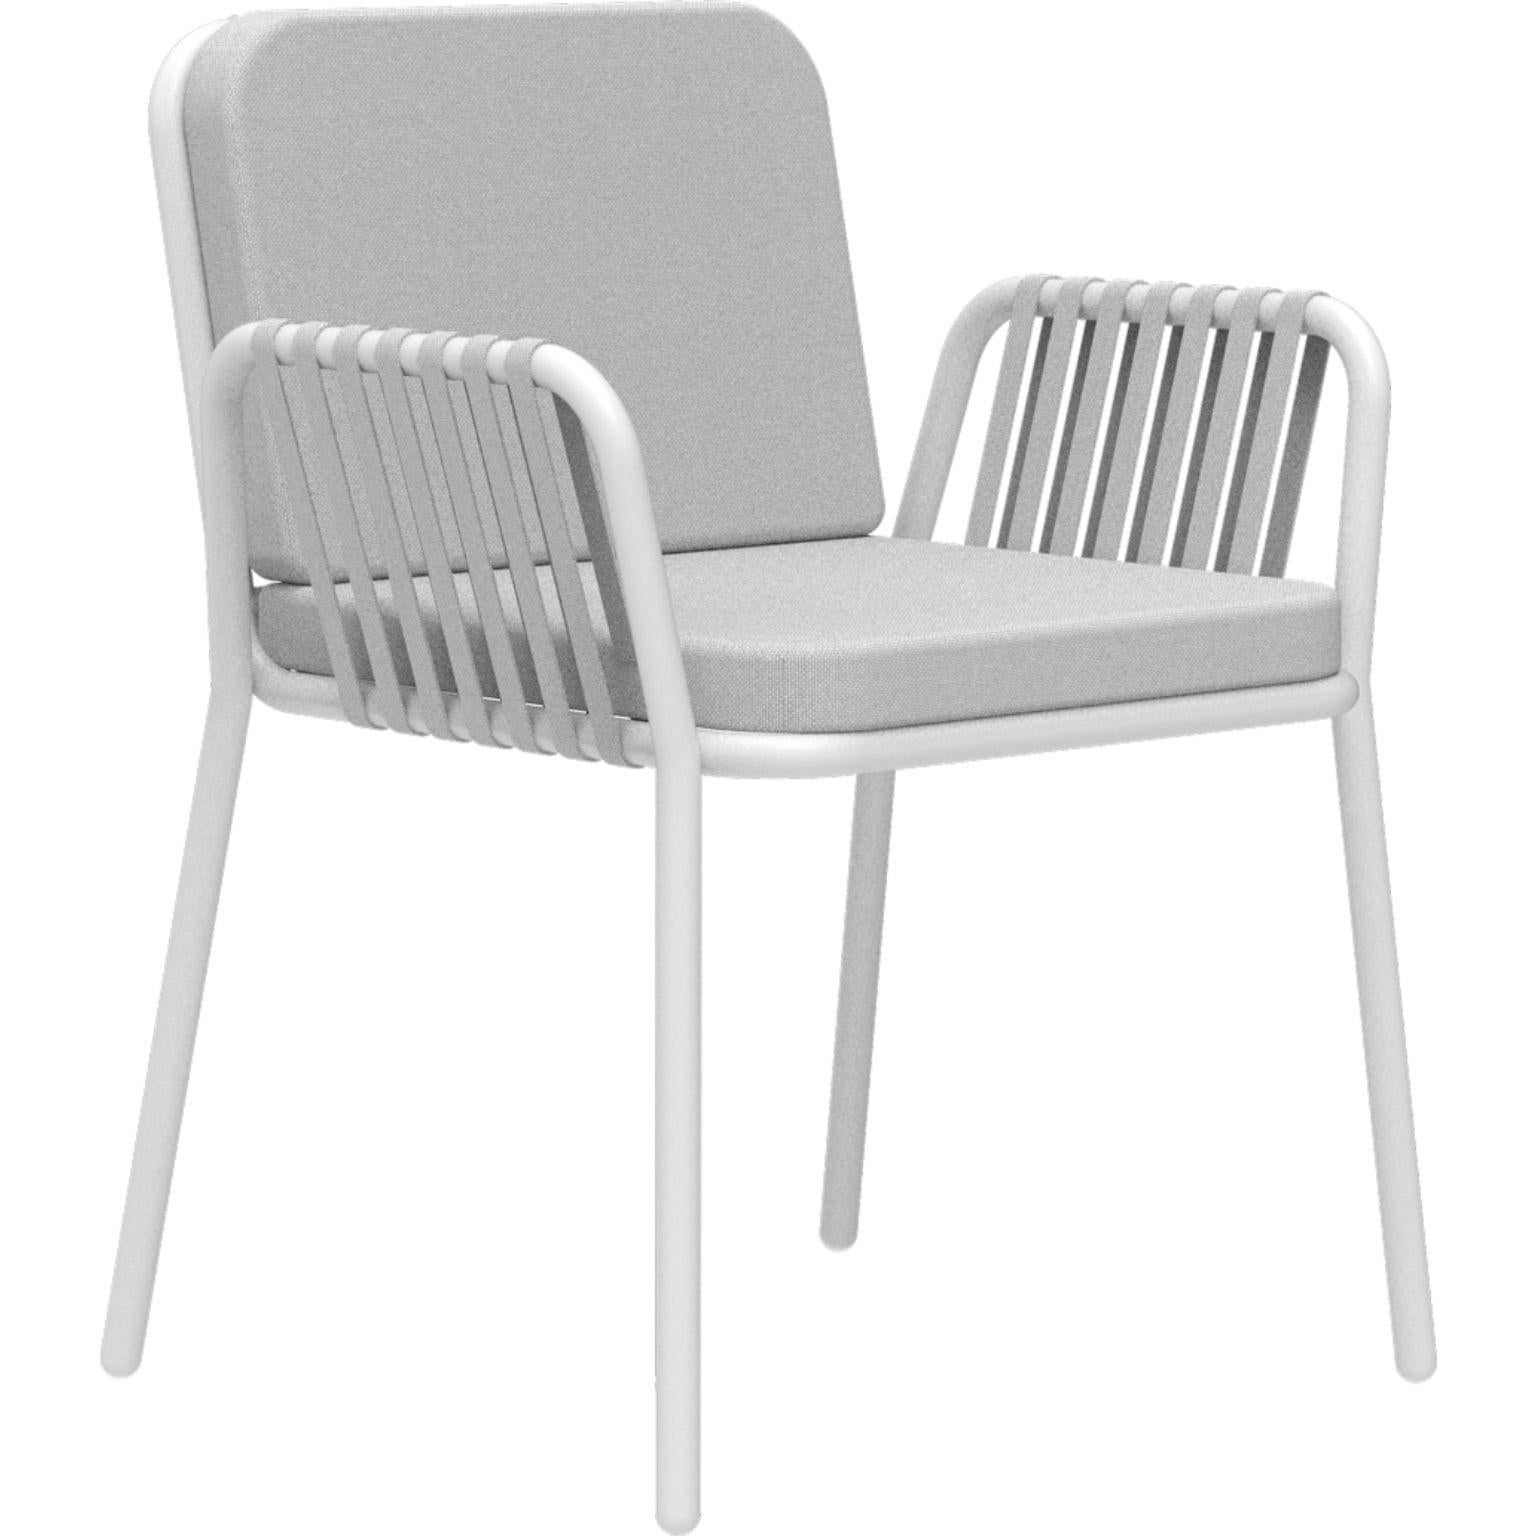 Ribbons white armchair by MOWEE
Dimensions: D60 x W62 x H83 cm (seat height 48).
Material: Aluminum and upholstery.
Weight: 5 kg.
Also available in different colors and finishes.

An unmistakable collection for its beauty and robustness. A